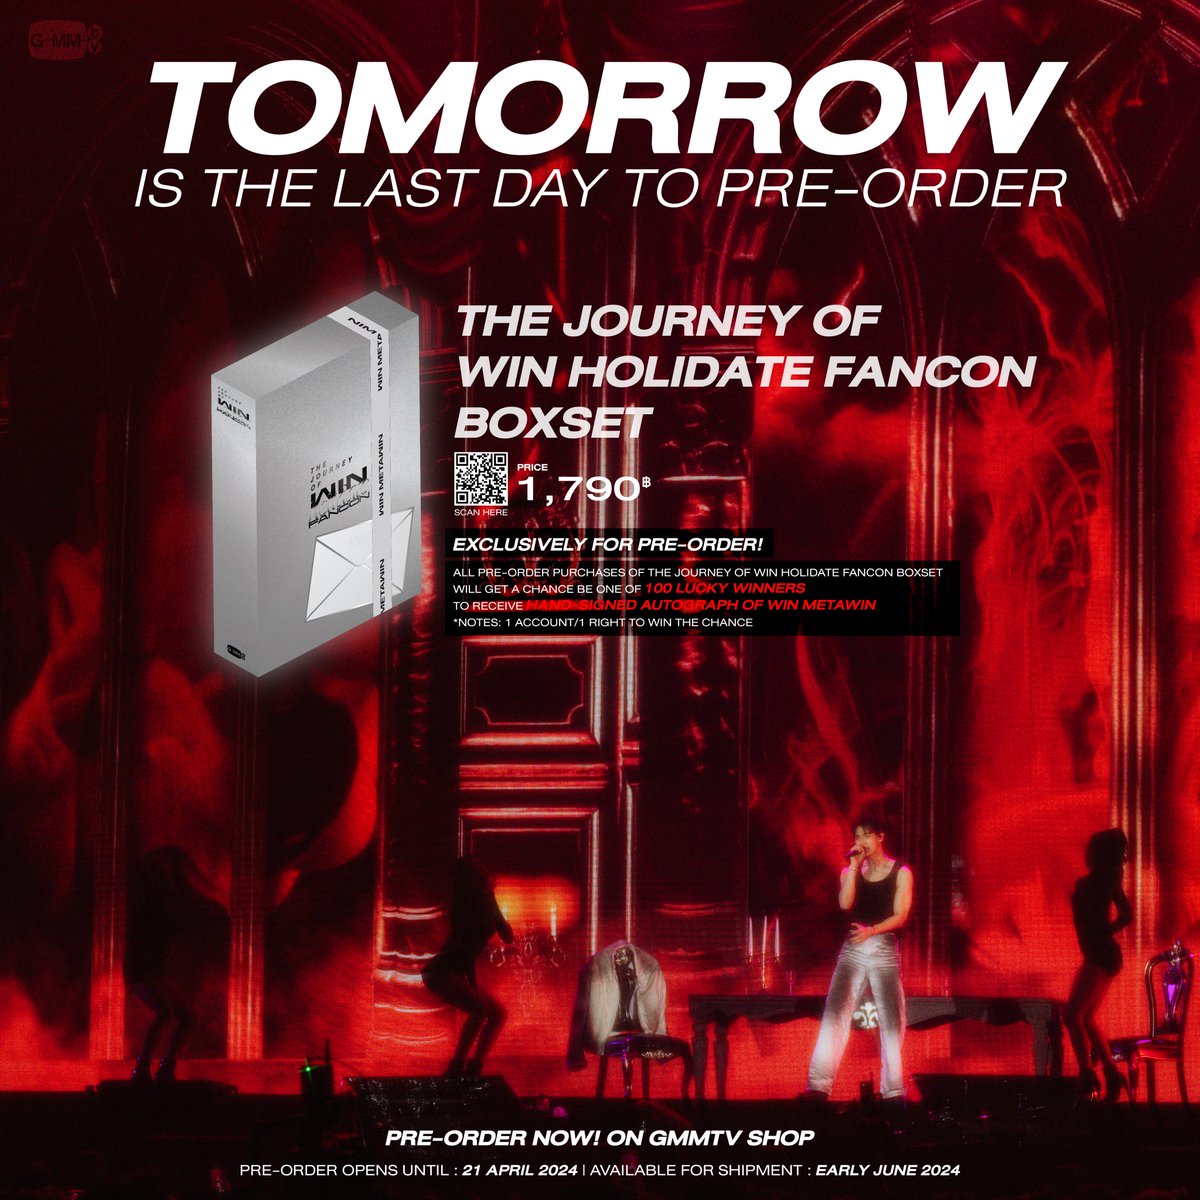 Tomorrow is the last day for pre-orders of the THE JOURNEY OF WIN HOLIDATE FANCON BOXSET! gmm-tv.com/shop/the-journ… #WinHolidateFancon #winmetawin #GMMTV